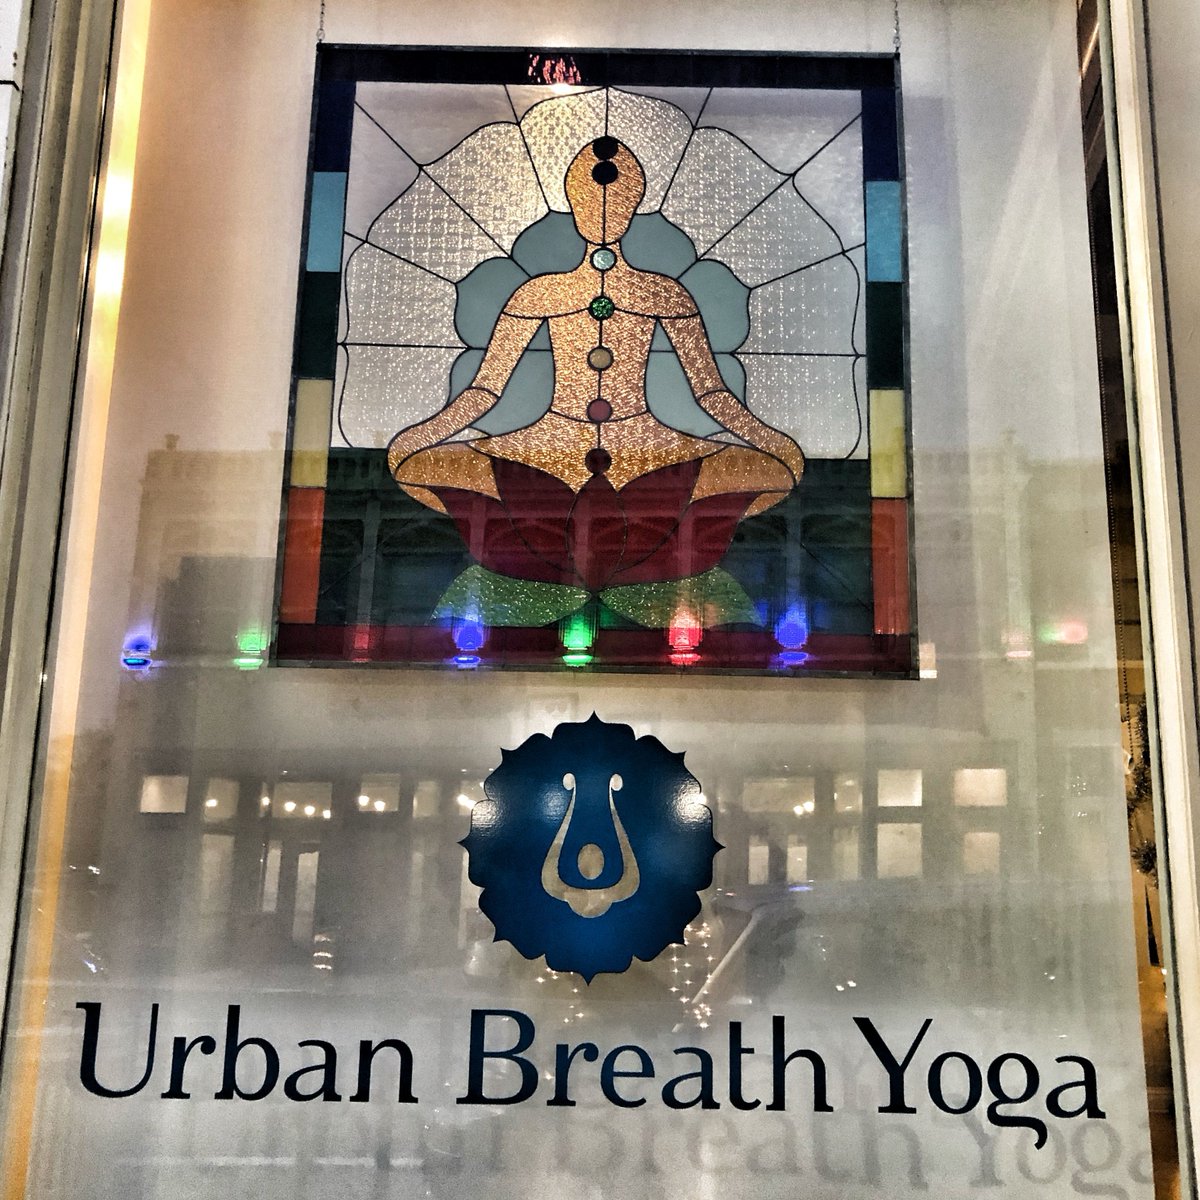 If sculpt your body, calm your mind, or 'Me' time are on your list of resolutions this year, head down to @urbanbreathyoga. Select from yoga classes & yoga instructor courses throughout the week! #thegrovestl #urbanbreathyoga #stlyoga #stlyogi #selfcare #prenatalyoga #stl